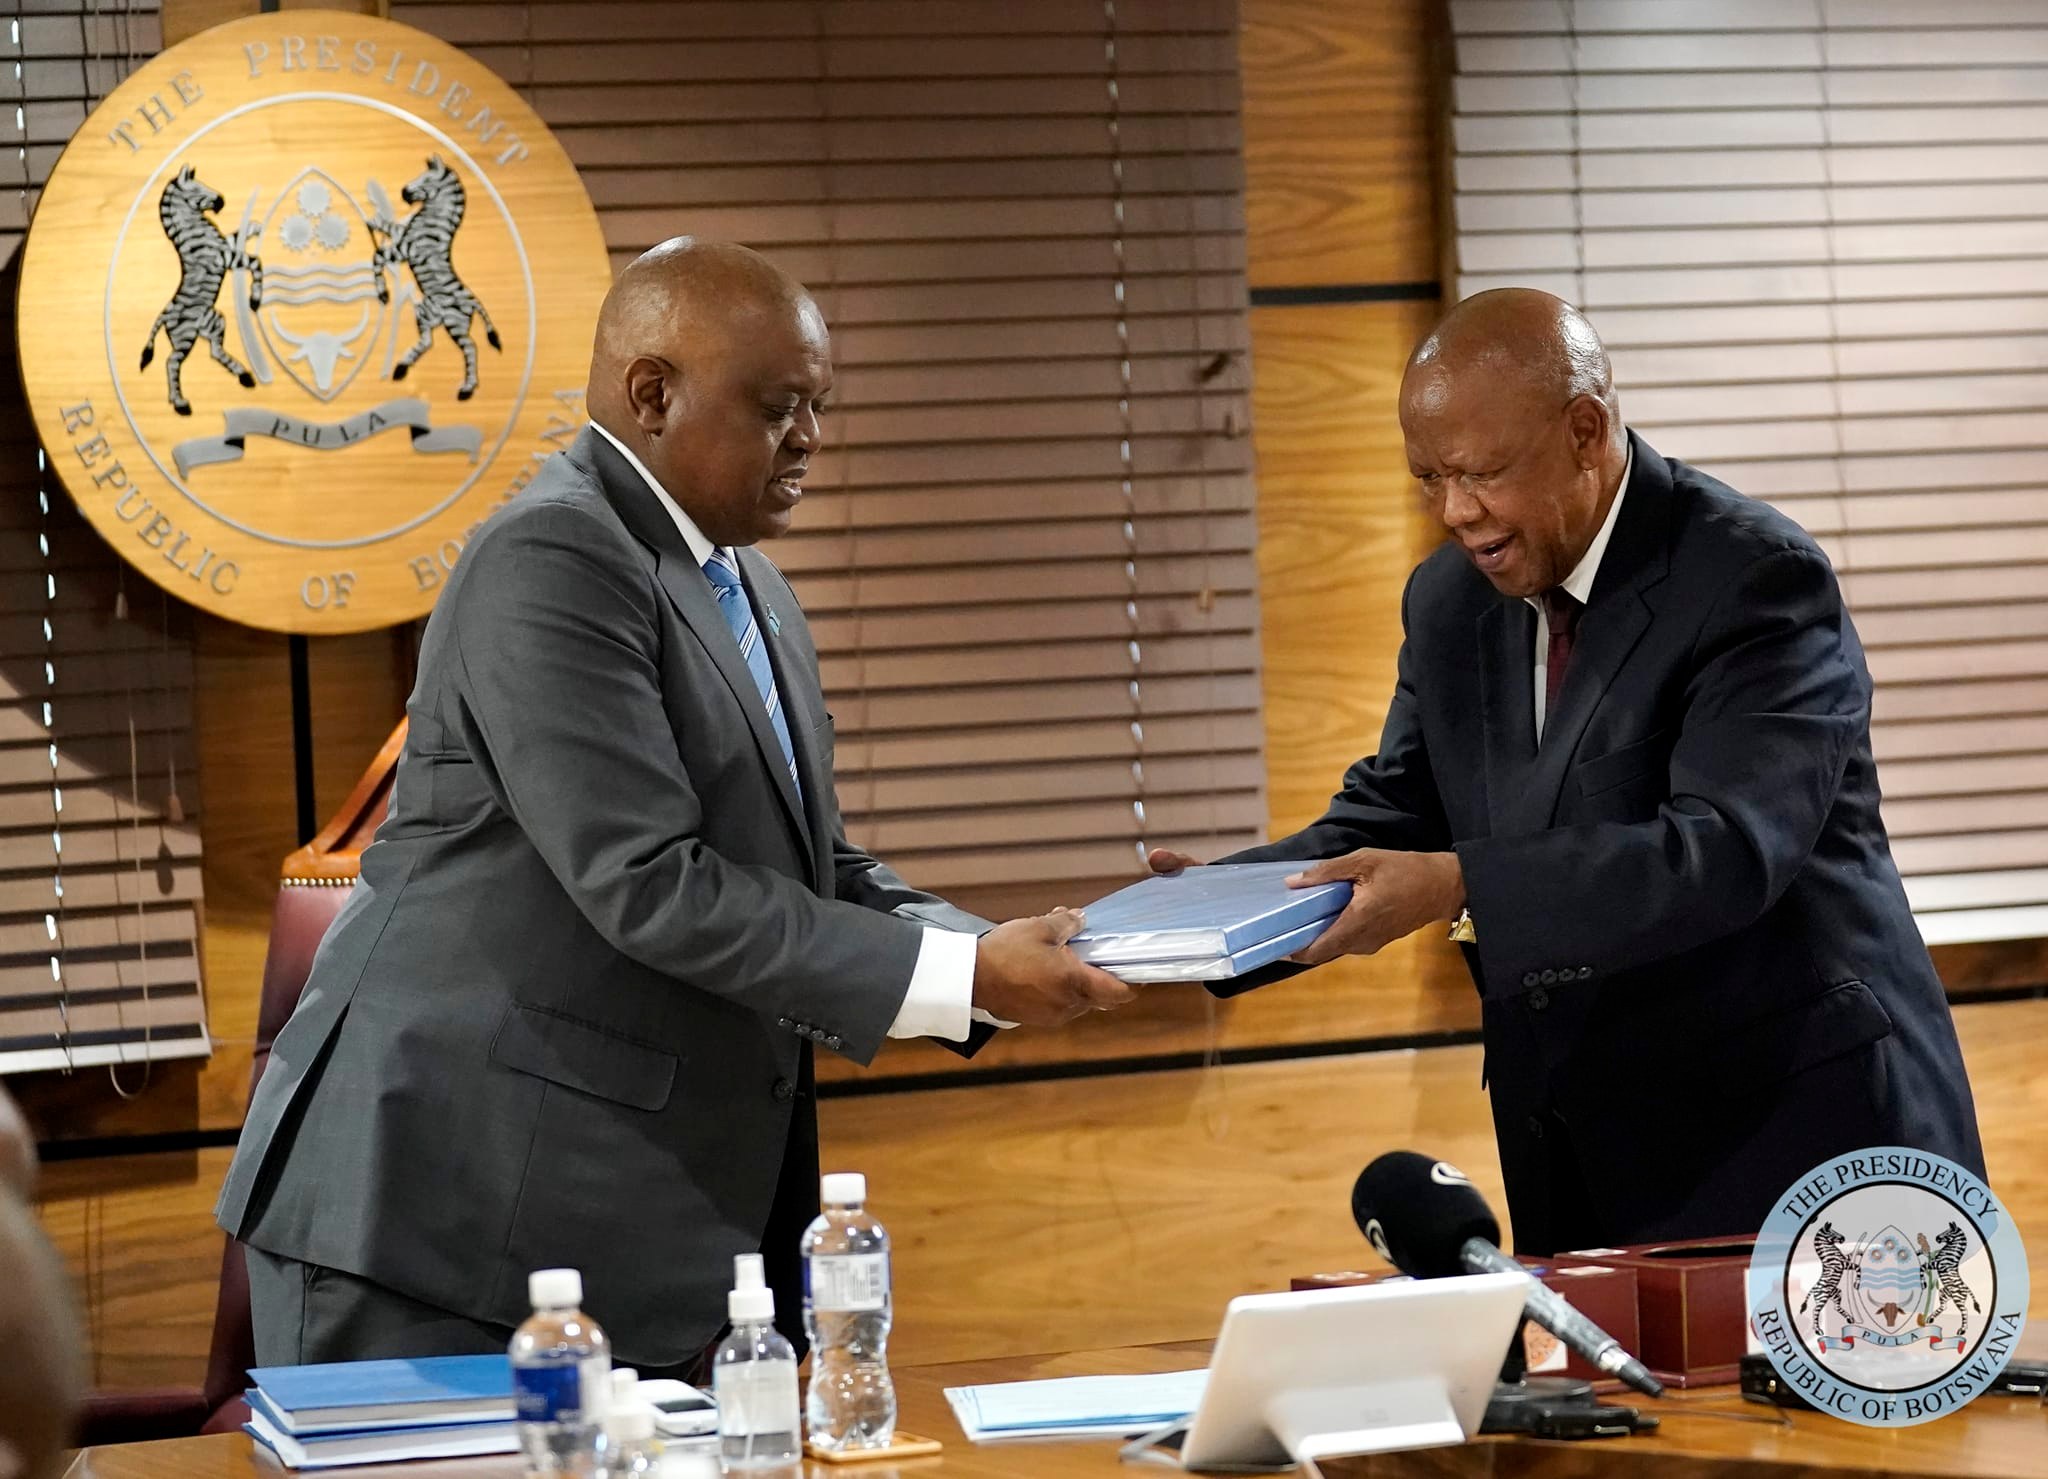 Chairperson of the Commission on Inquiry Justice Maruping Dibotelo presents report of the Commission to President Mokgweetsi Masisi (photo credit: BW Presidency)